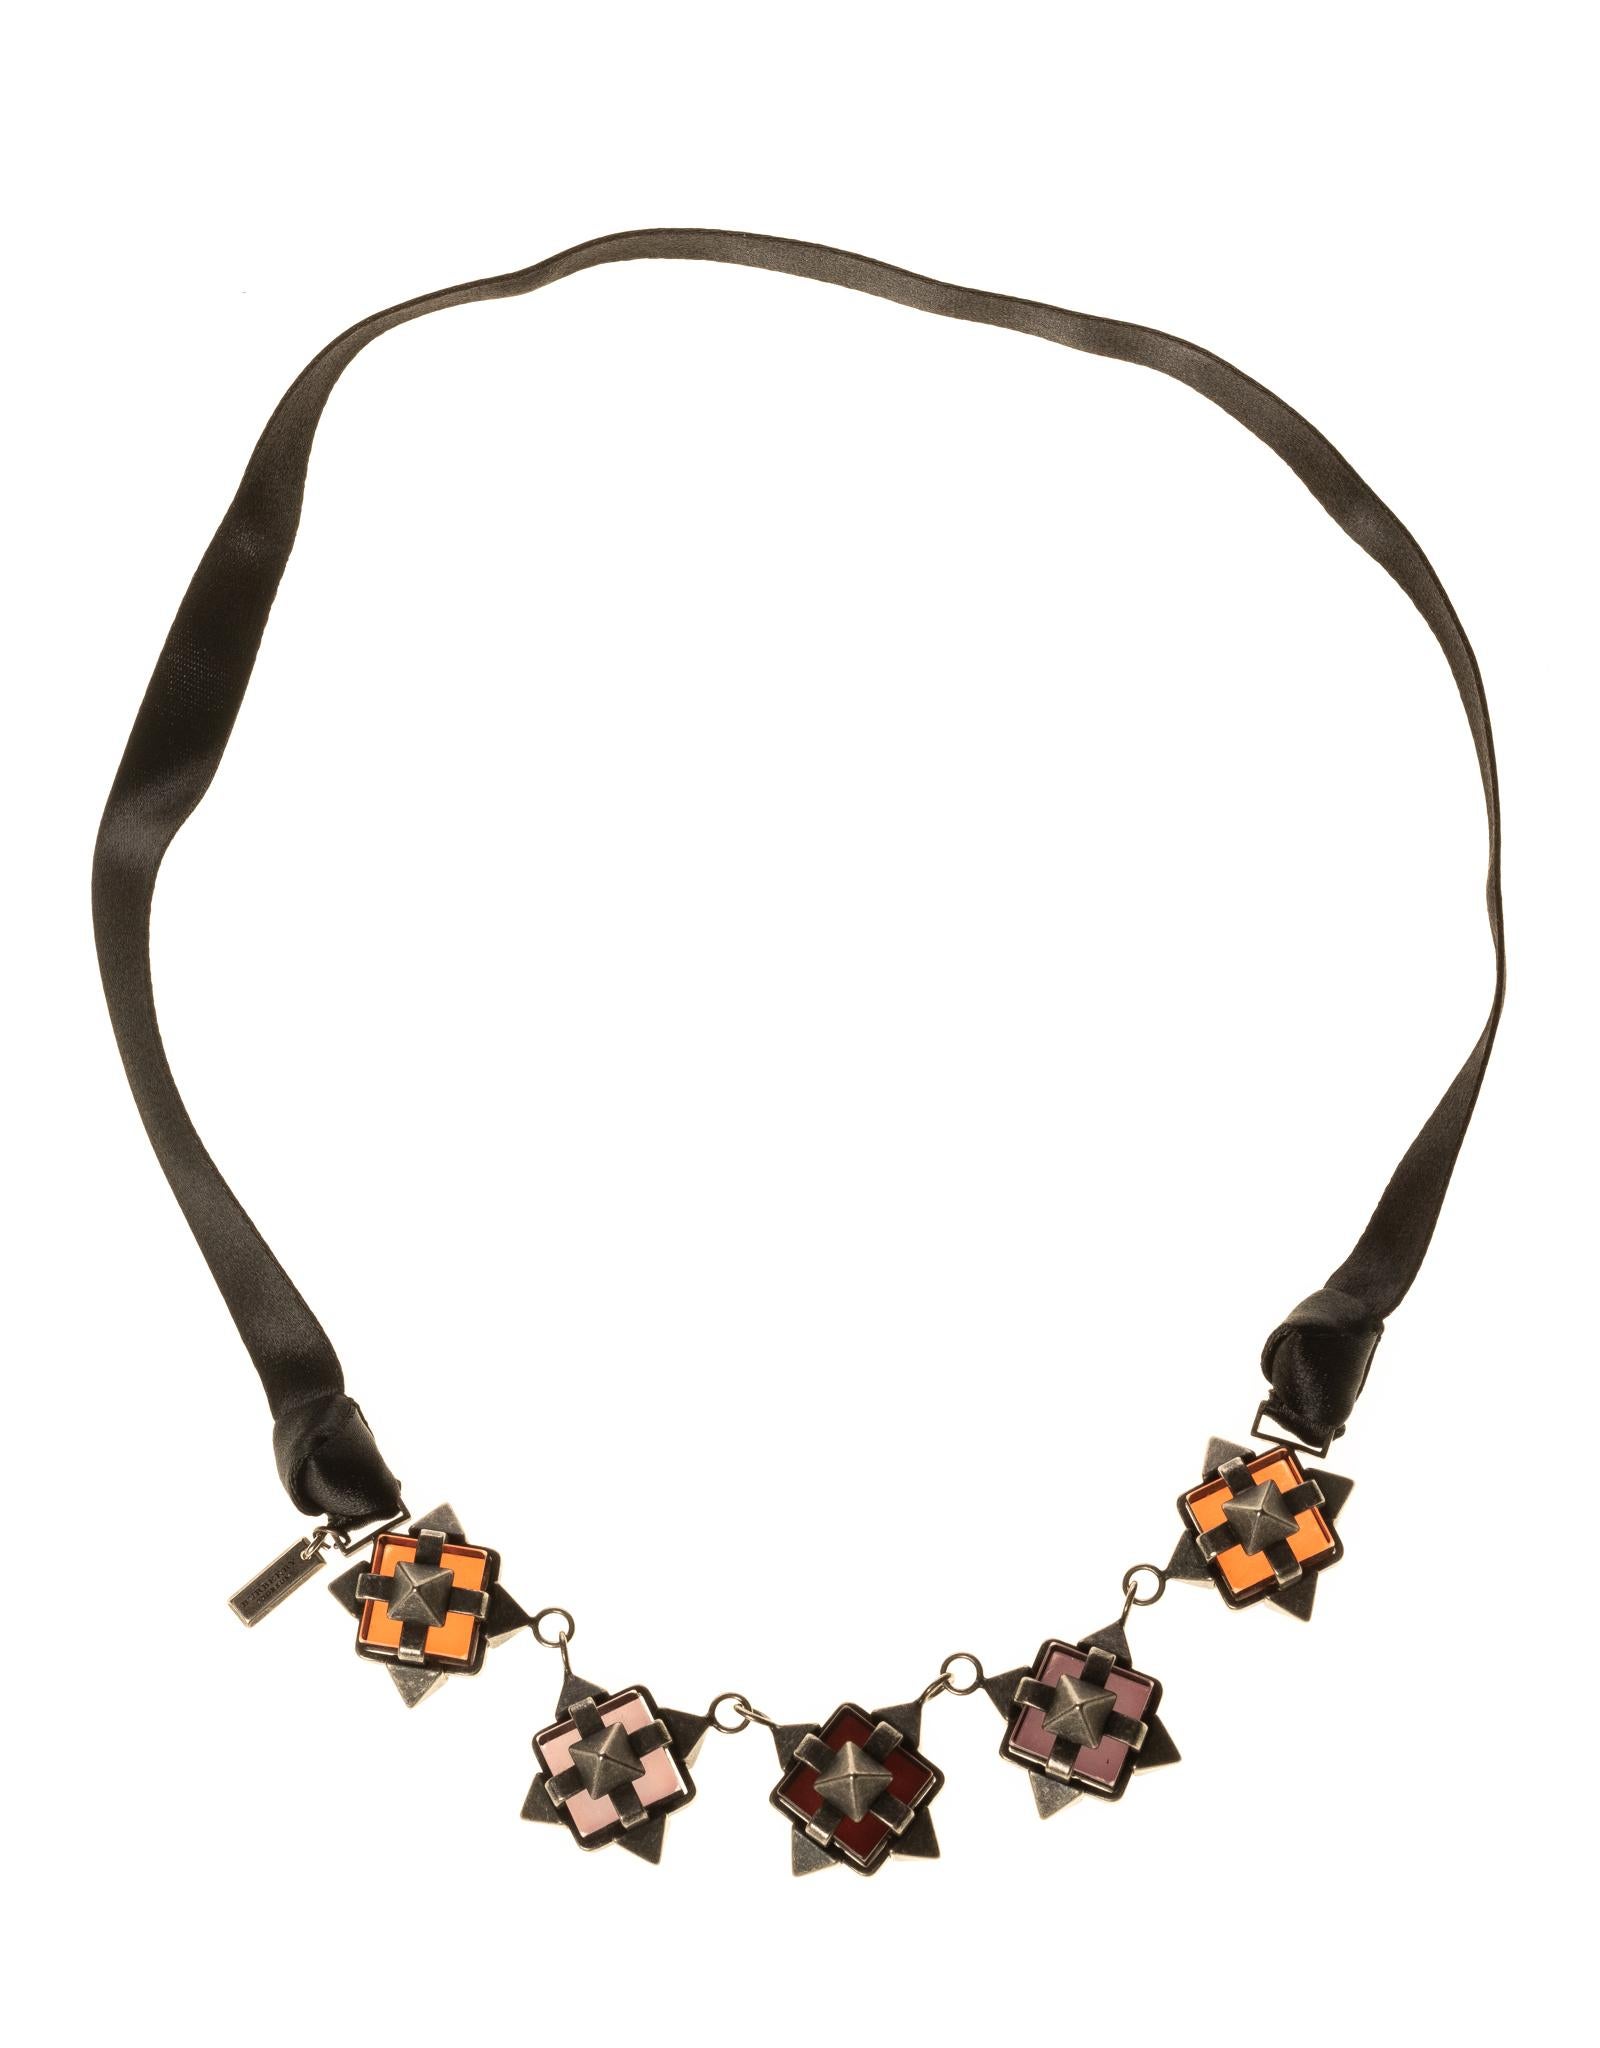 This Burberry necklace is made of a beautiful black grosgrain ribbon with five metal and poured glass ornaments connected with a chain. The ornaments look black and grey with normal light, but the poured glass has subtle color that changes depending